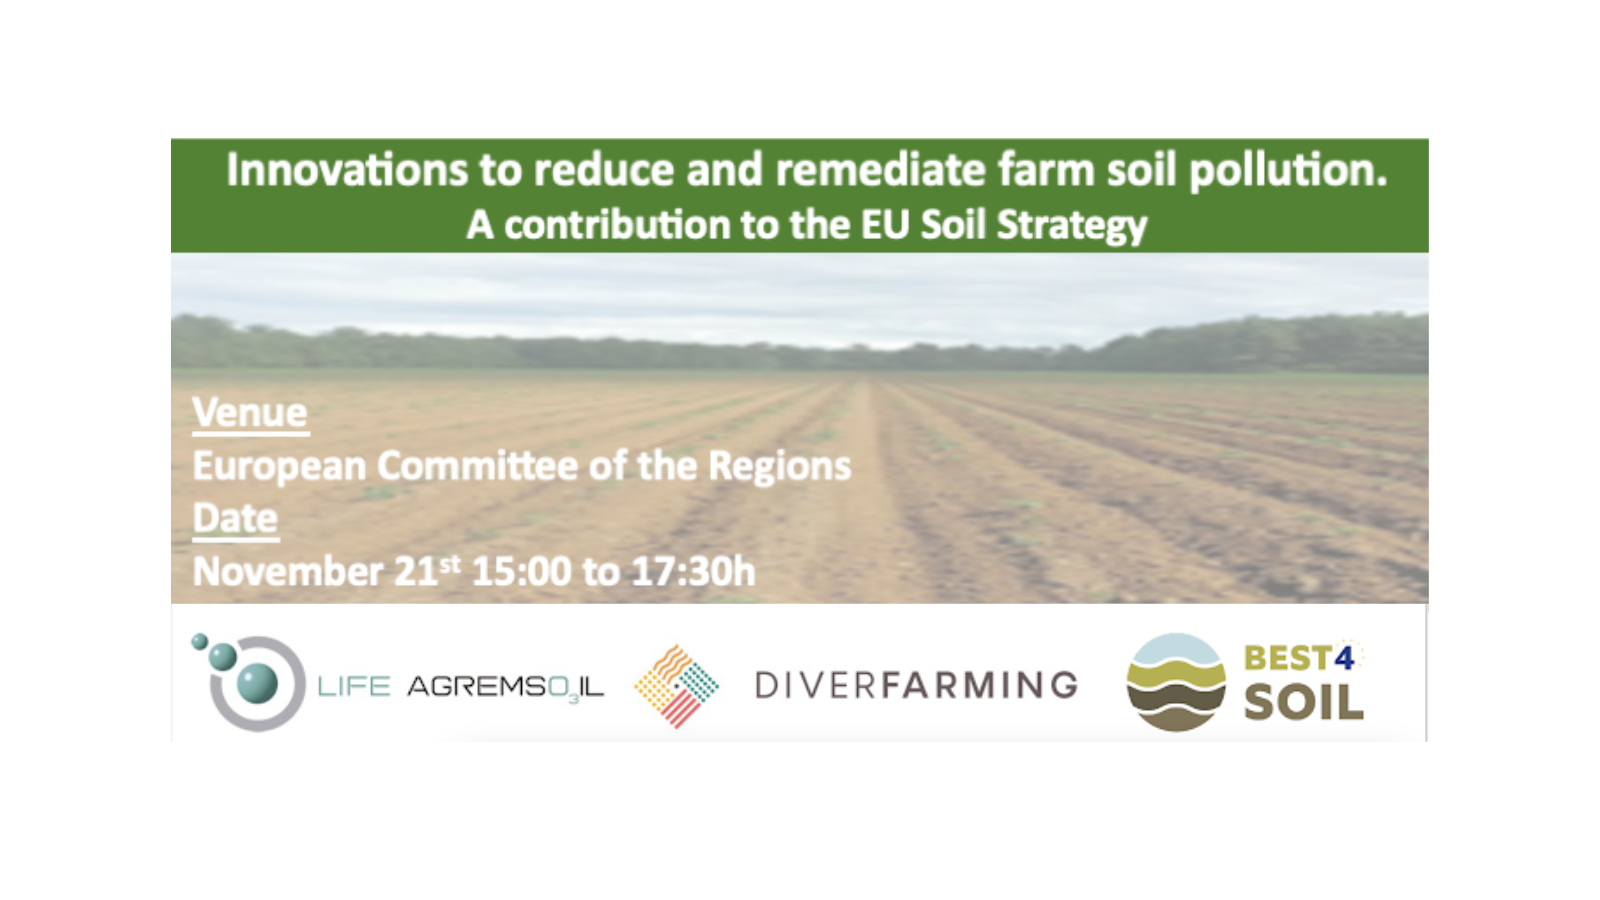 CONFERENCE ON INNOVATIONS TO REDUCE AND REMEDIATE FARM SOIL POLLUTION. A CONTRIBUTION TO THE EU SOIL STRATEGY.